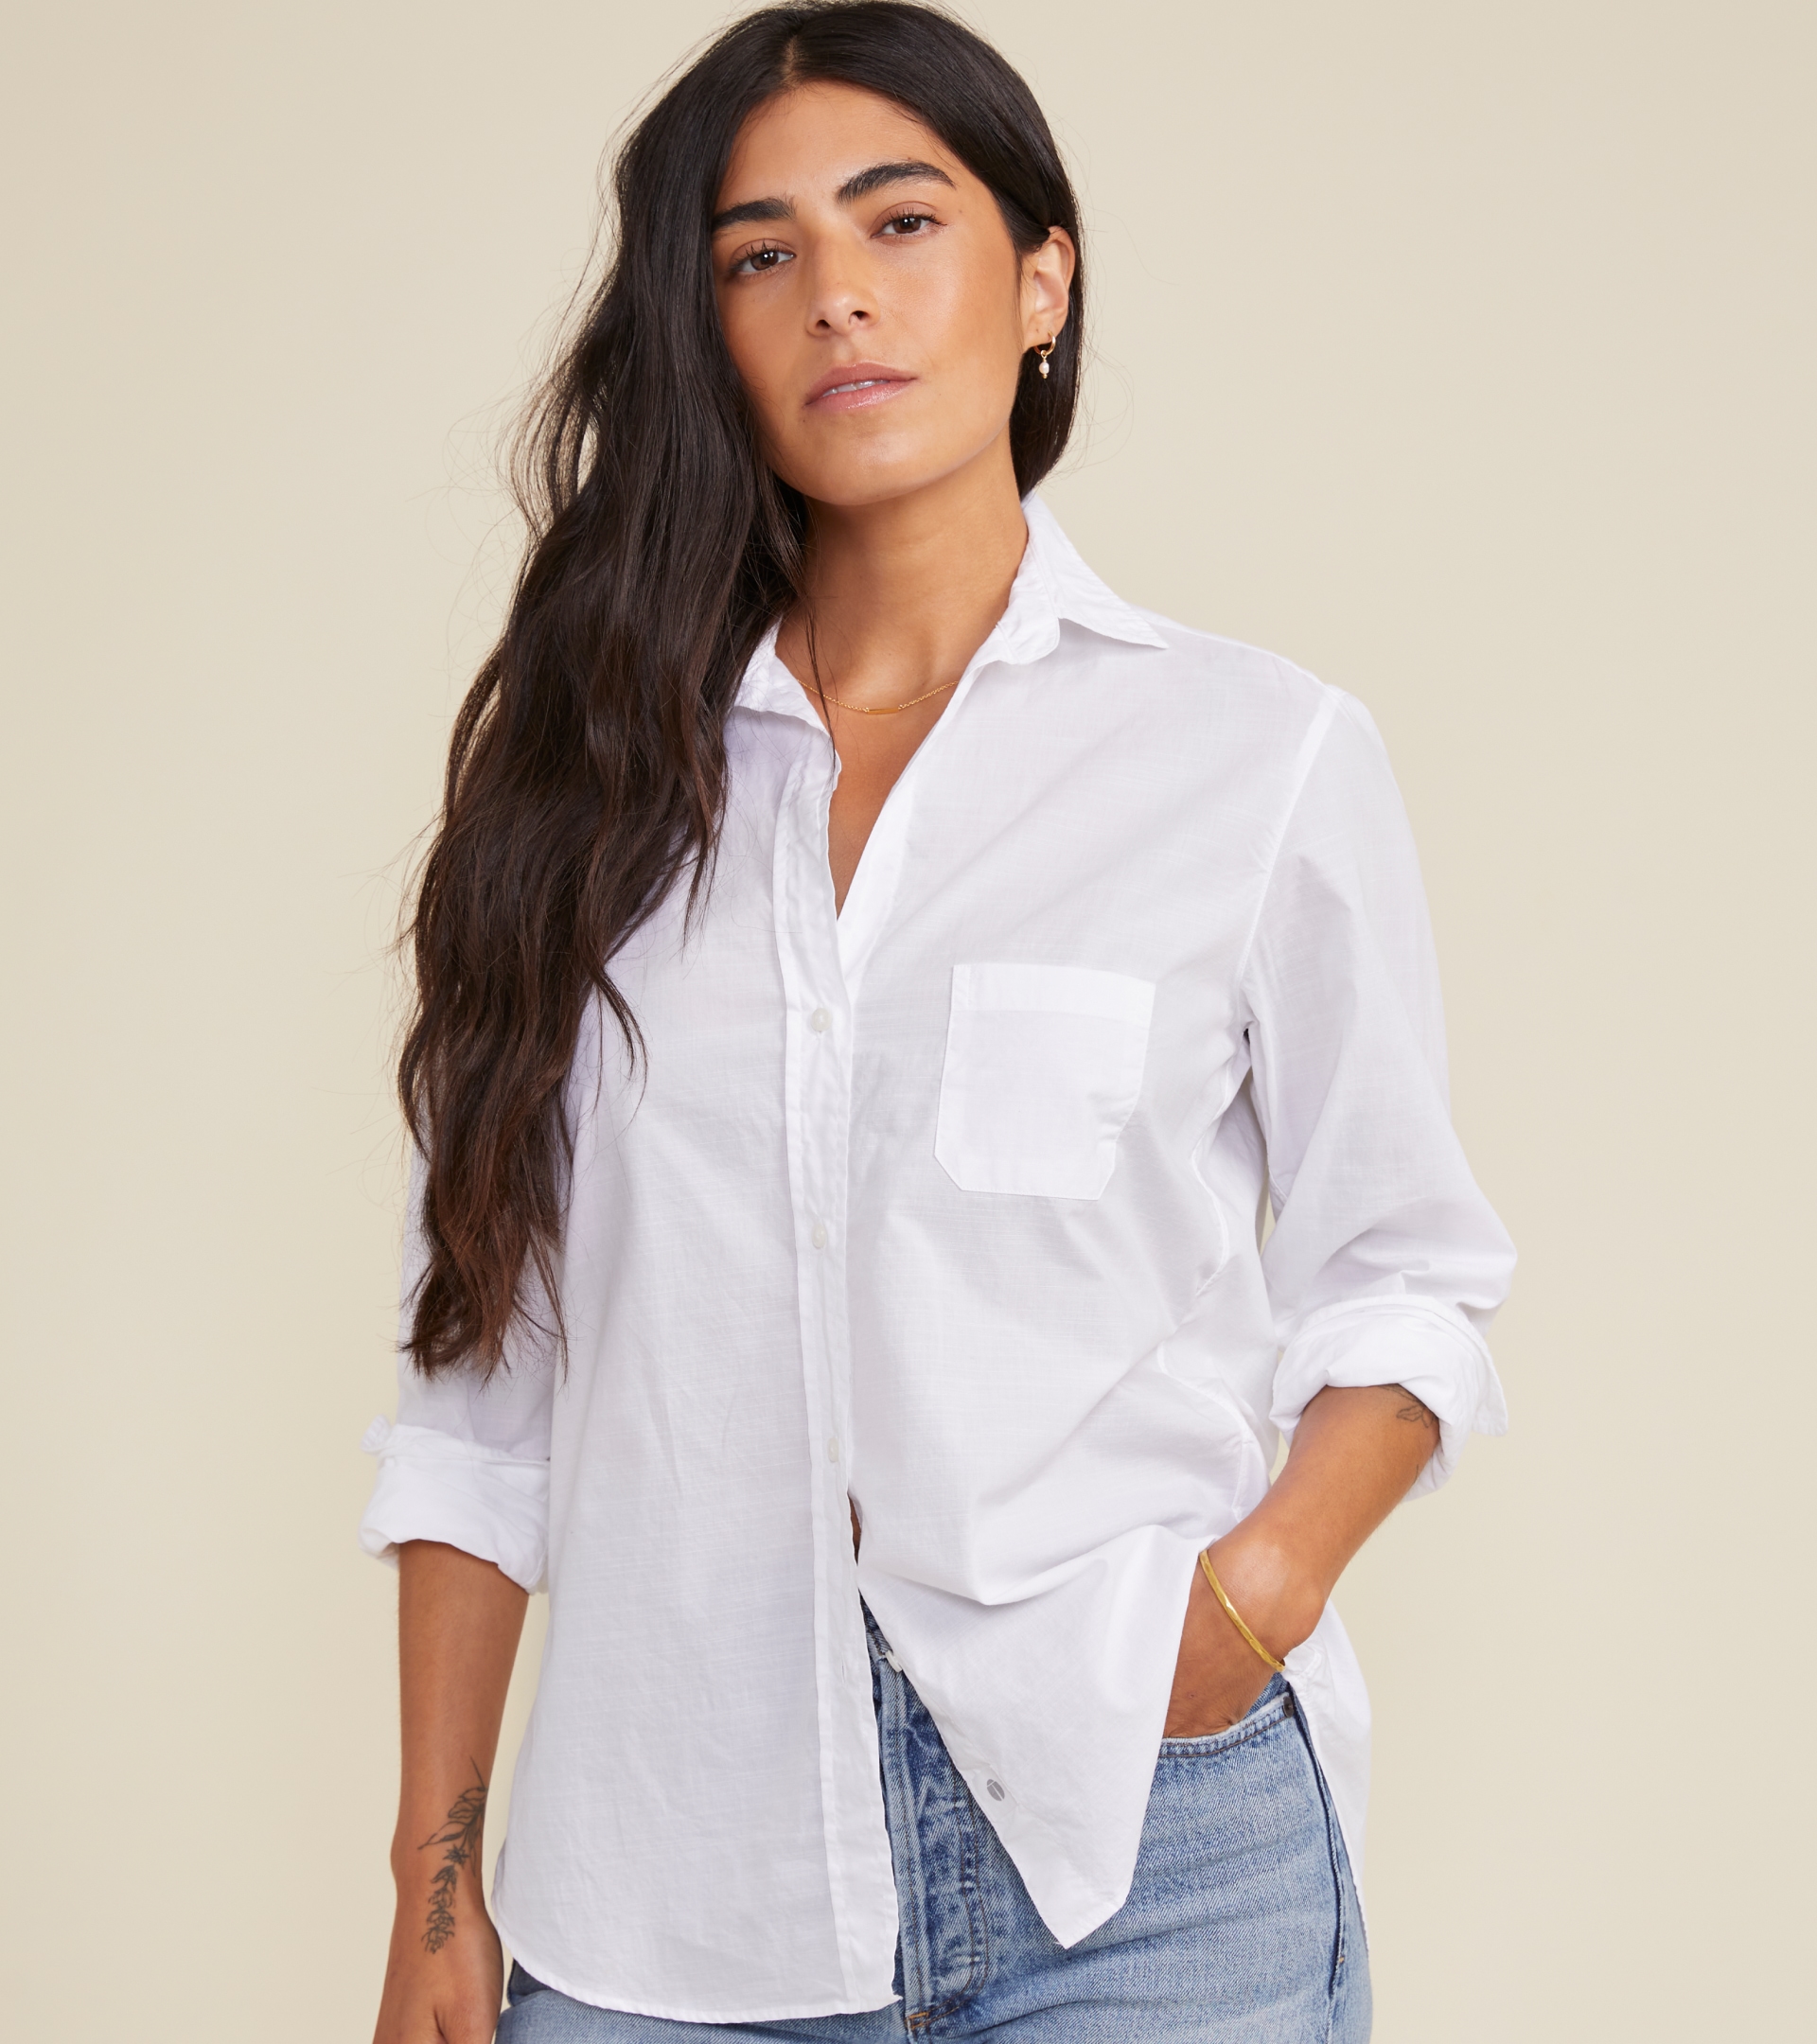 The Hero Button-Up Shirt Classic White, Washed Cotton view 2